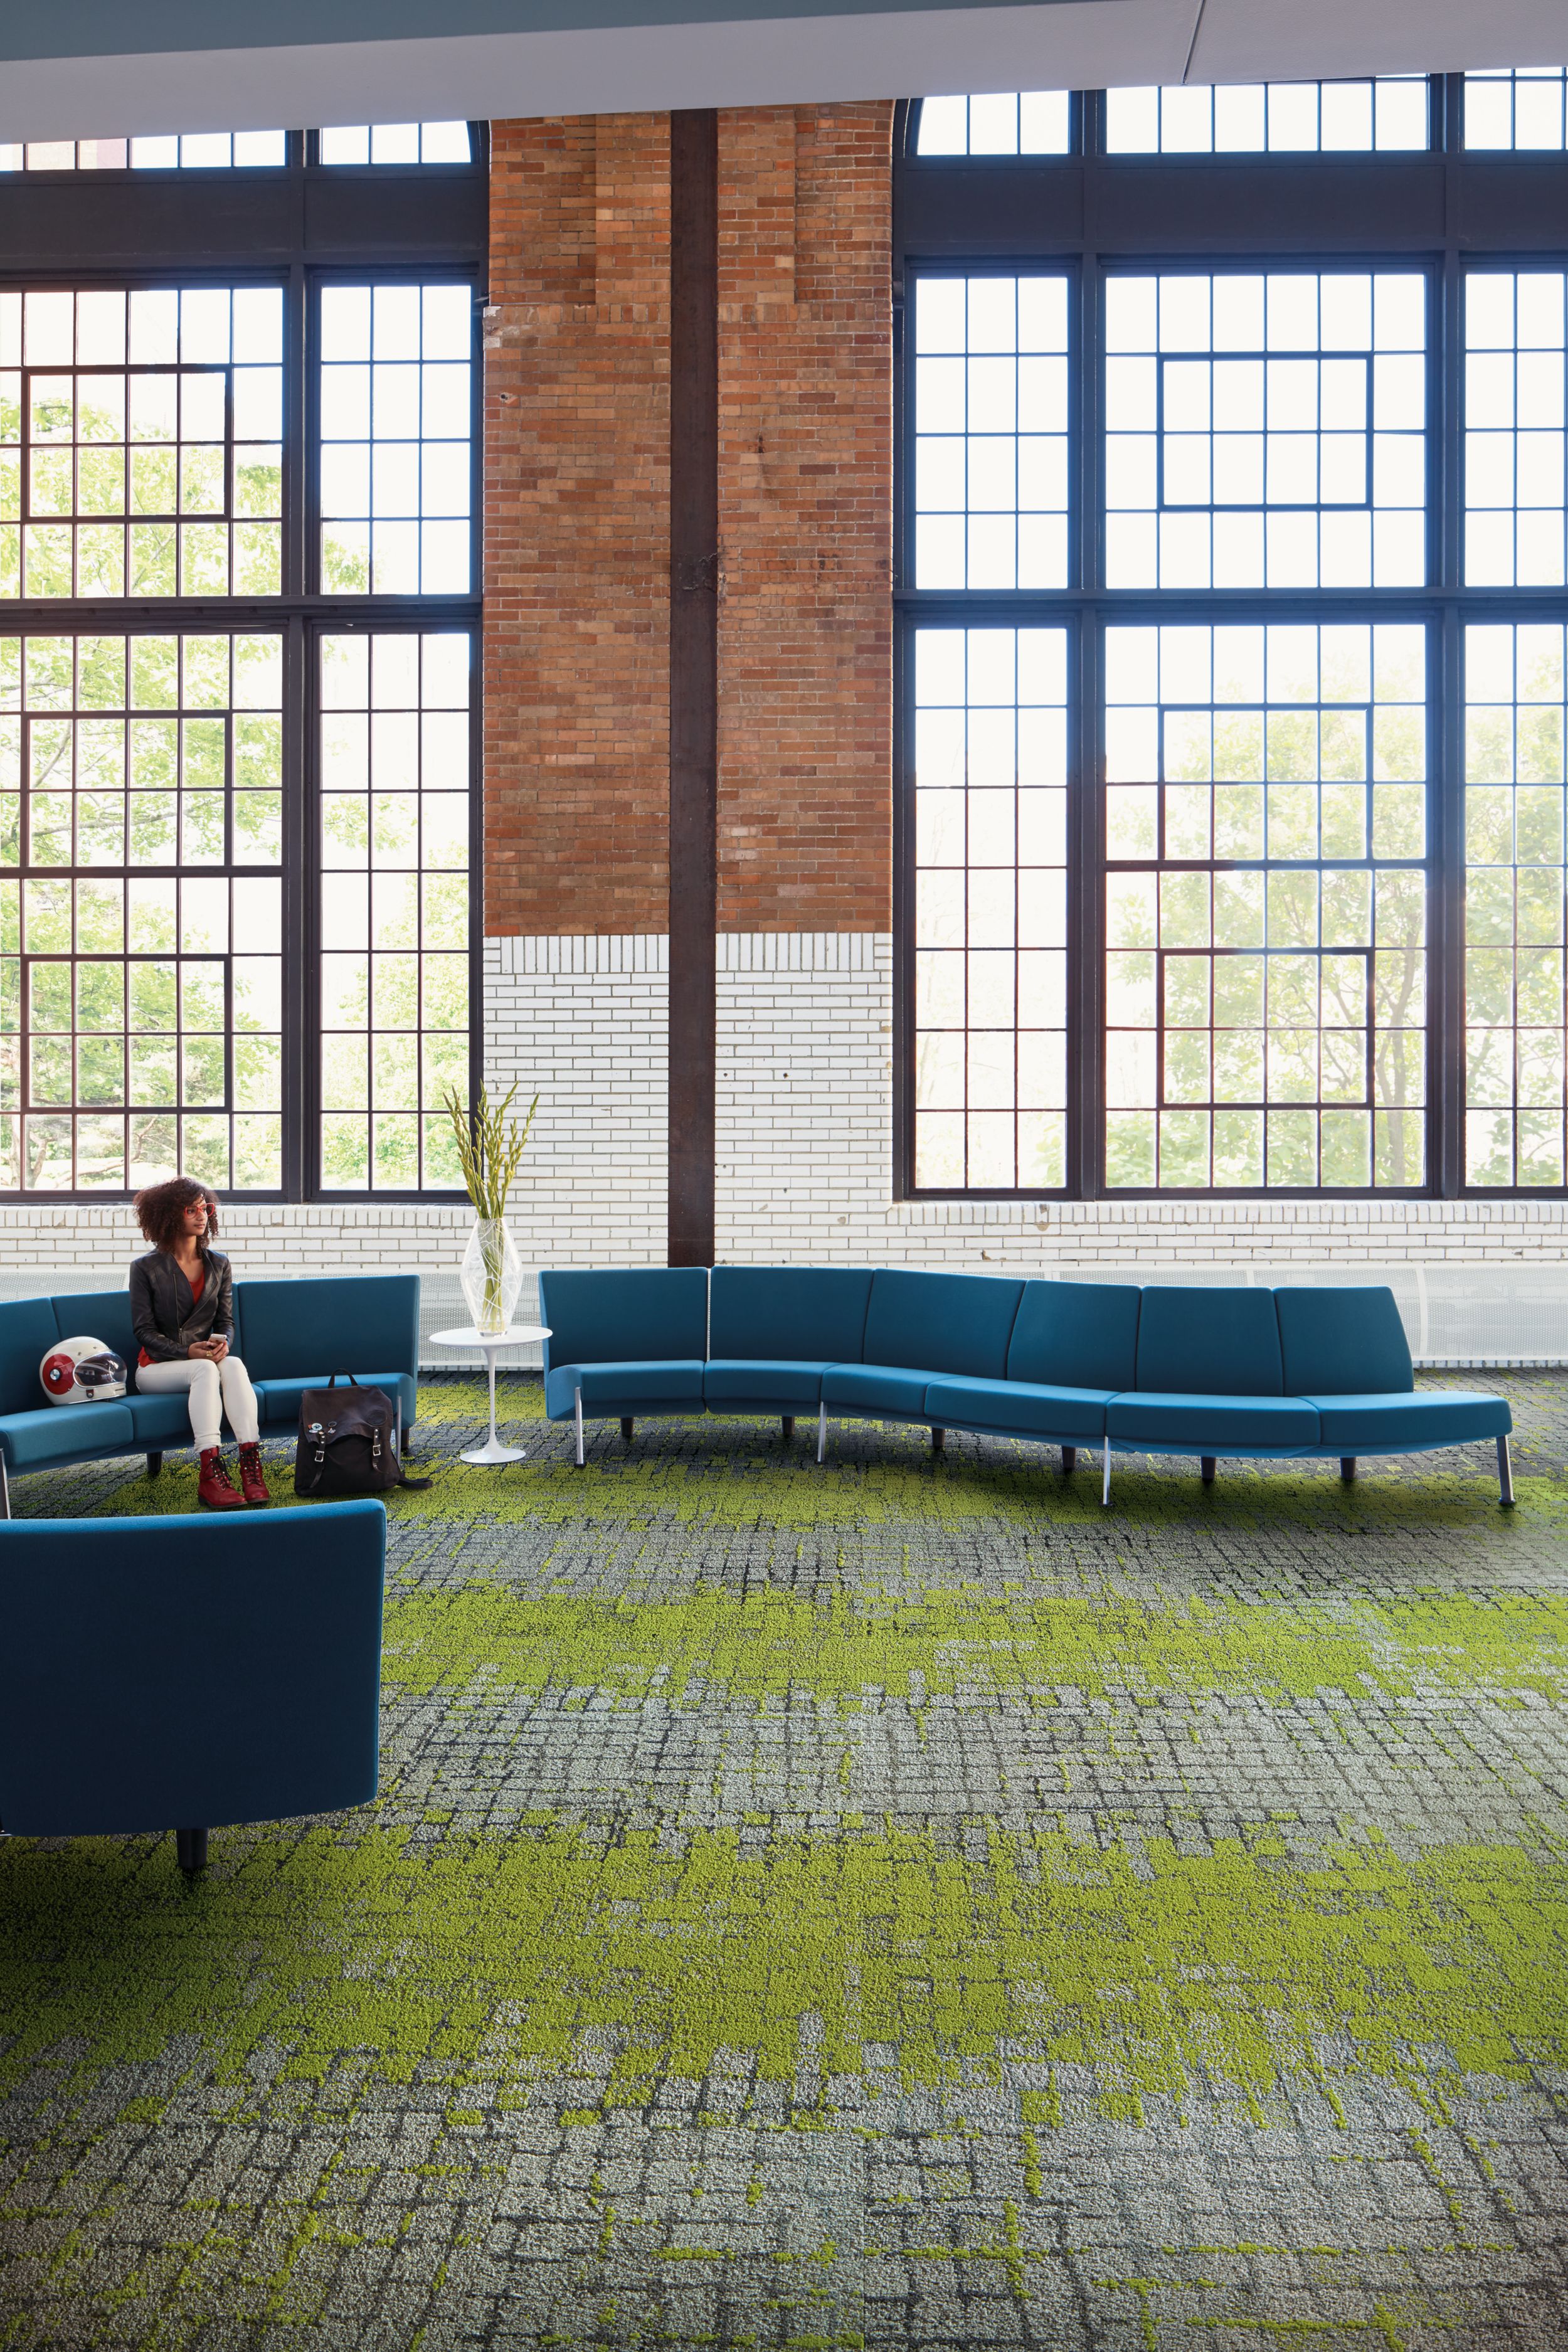 Interface Moss and Moss in Stone carpet tile in seating area with blue couches and women seated número de imagen 4